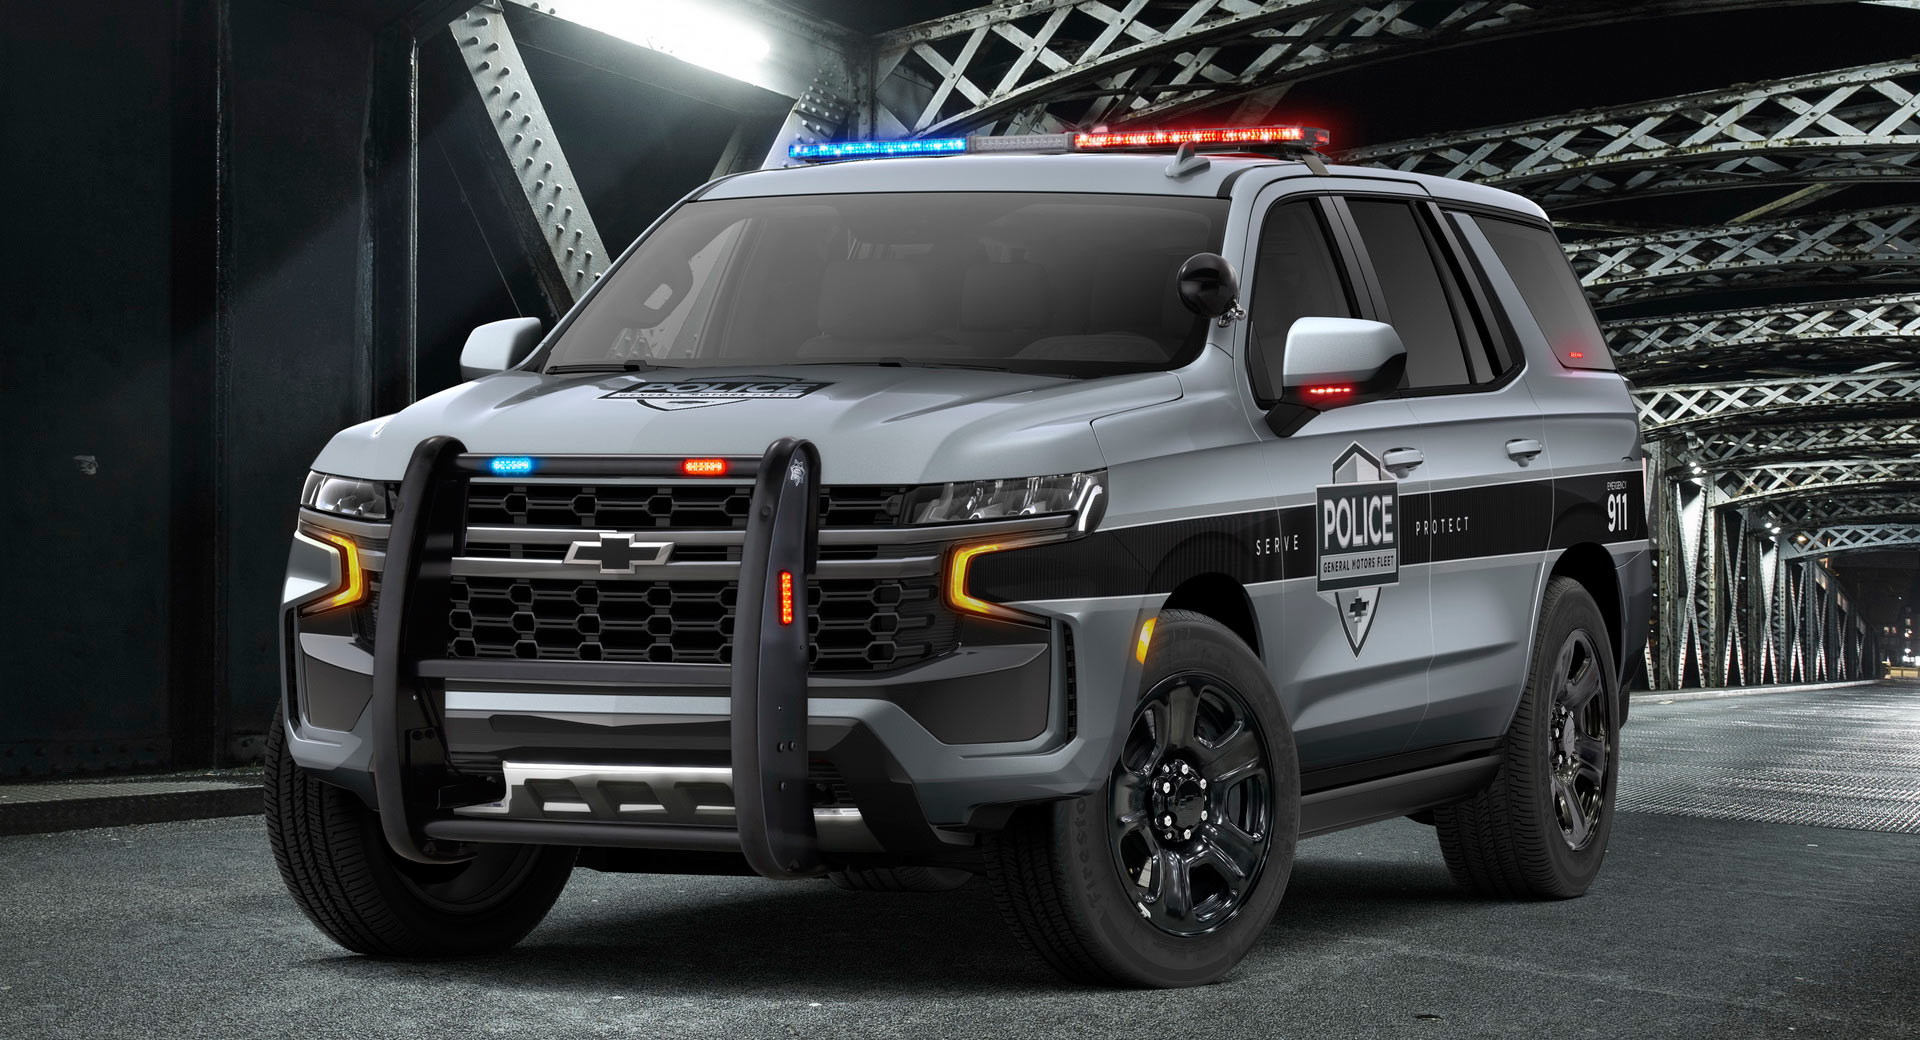 2021 Chevy Tahoe Joins Law Enforcement As Pursuit And Special Service